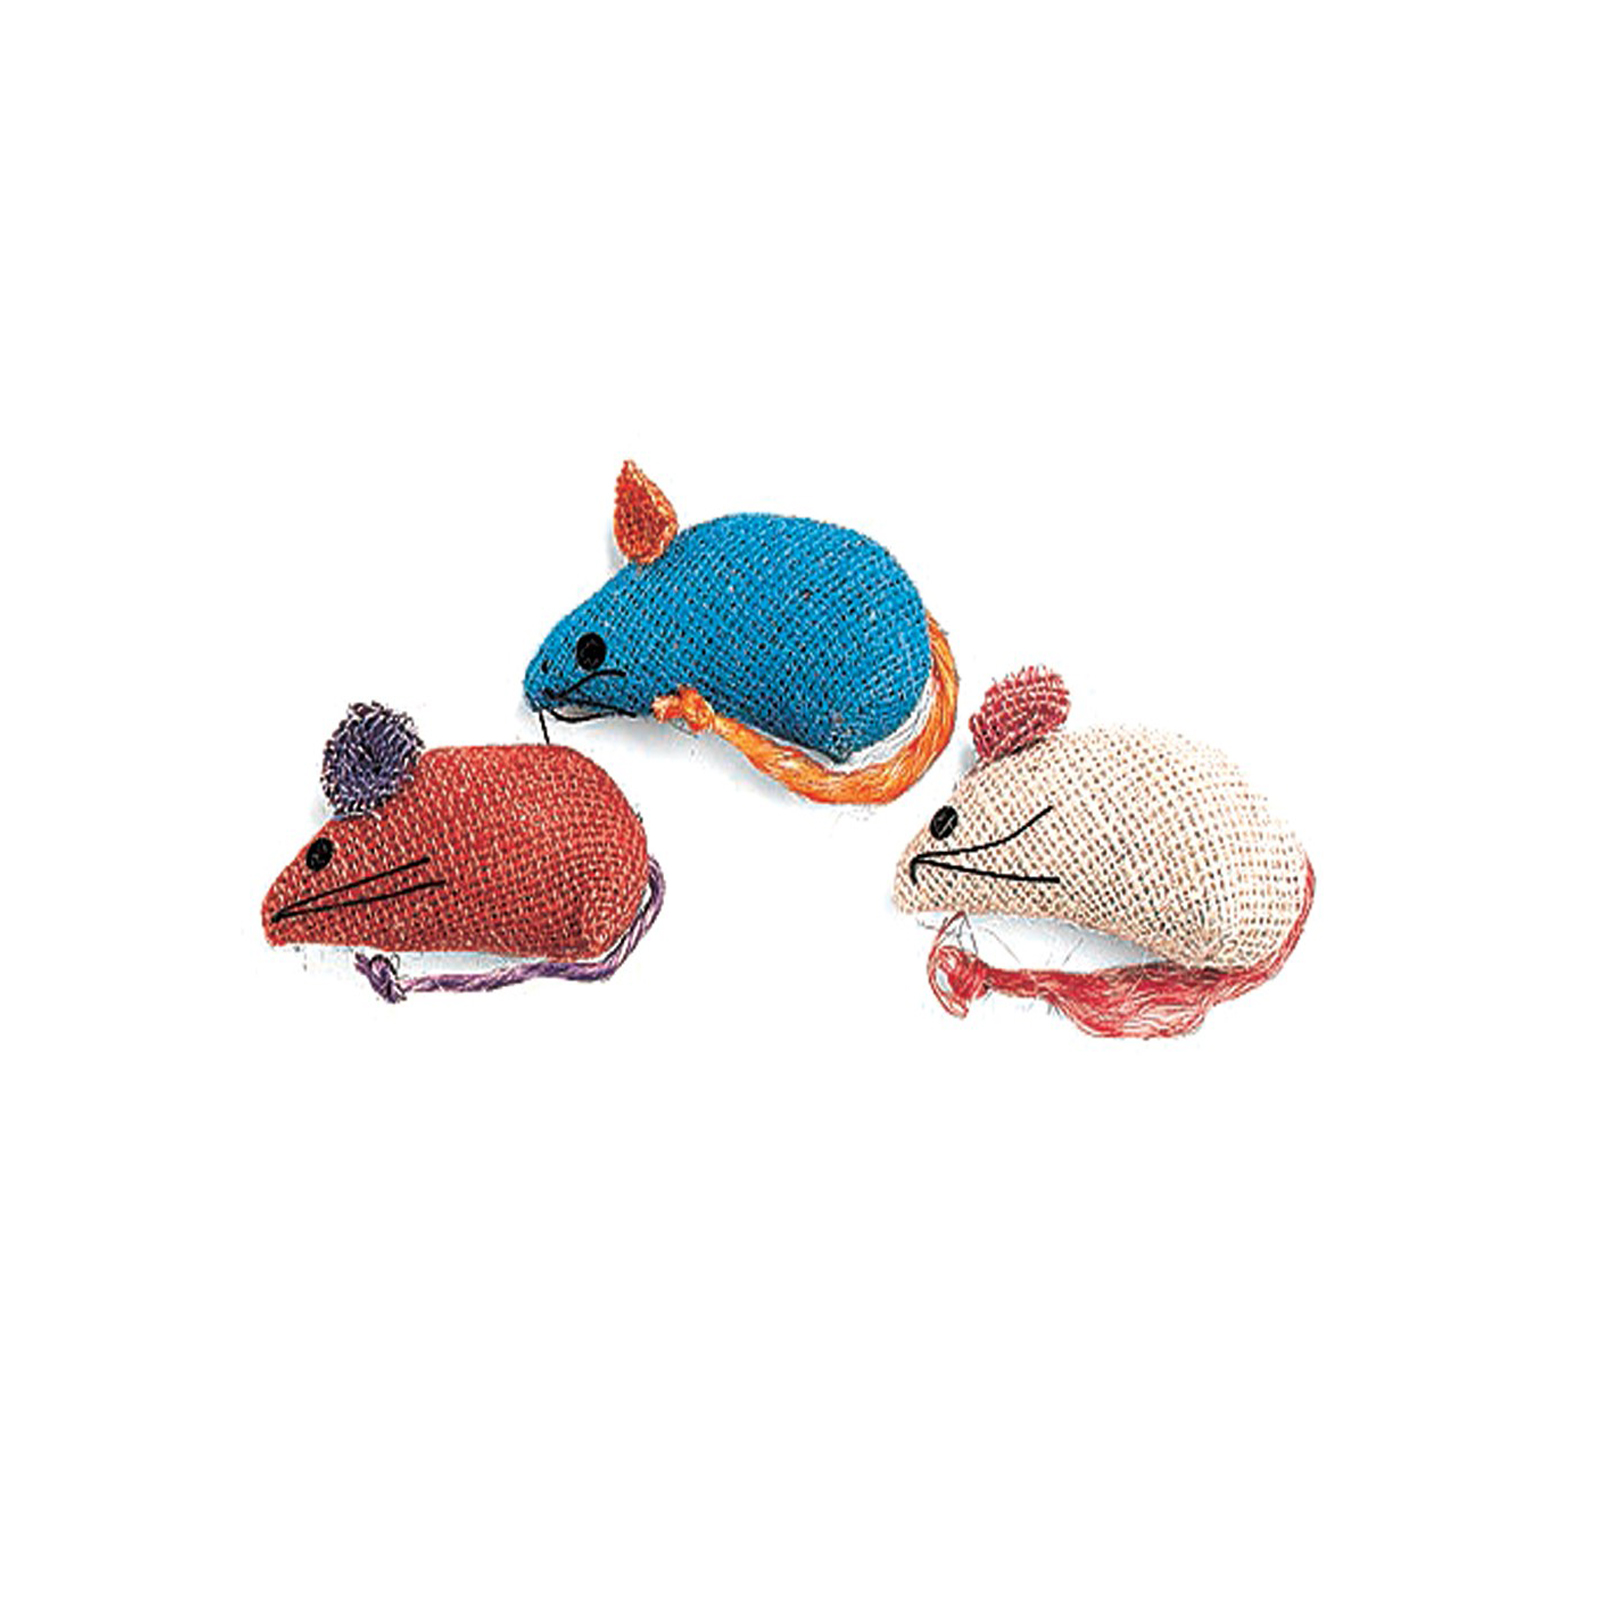 Ethical Products Inc. Toy Burlap Colored Mice 3 pk.